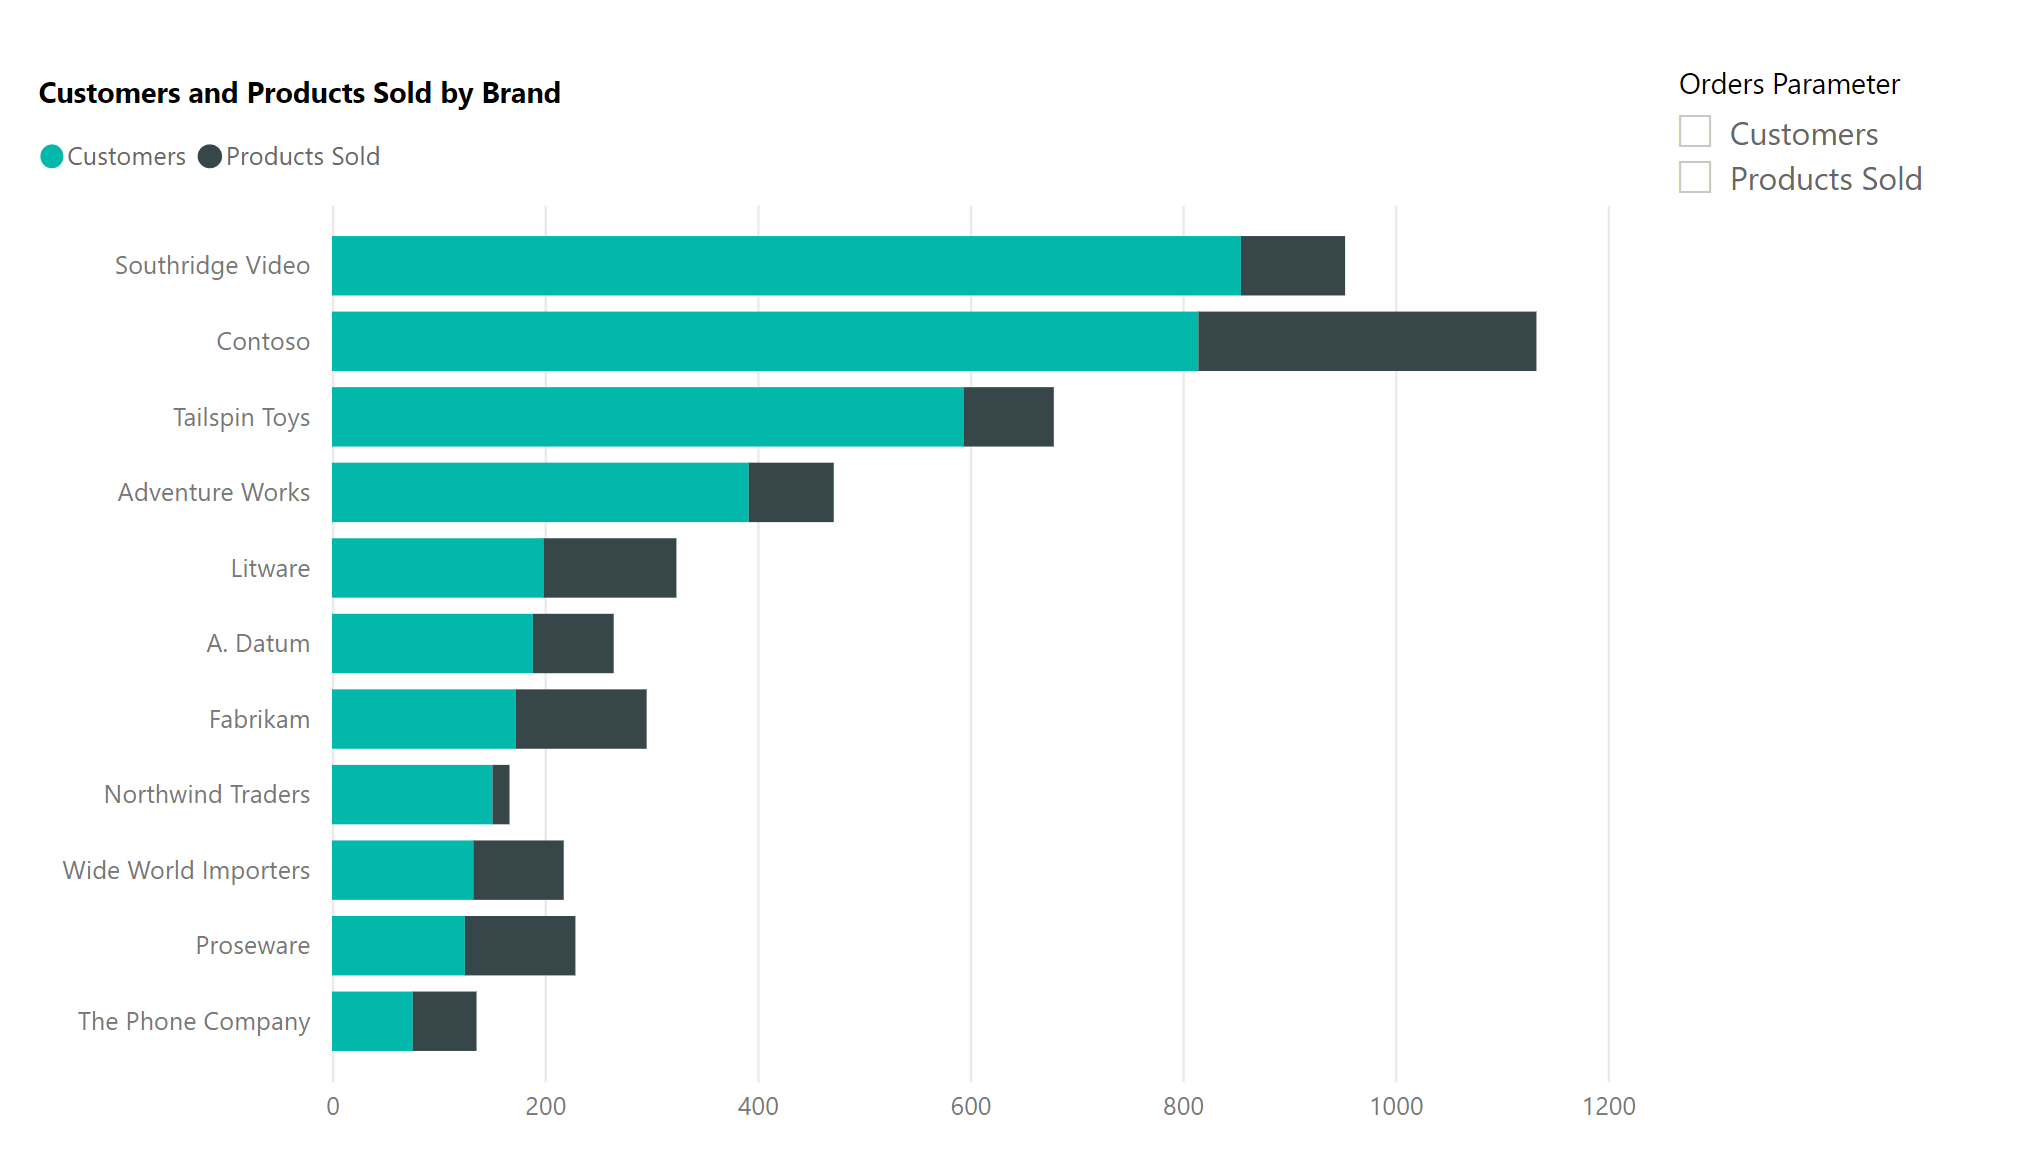 Stacked bar chart showing customers and products sold by brand